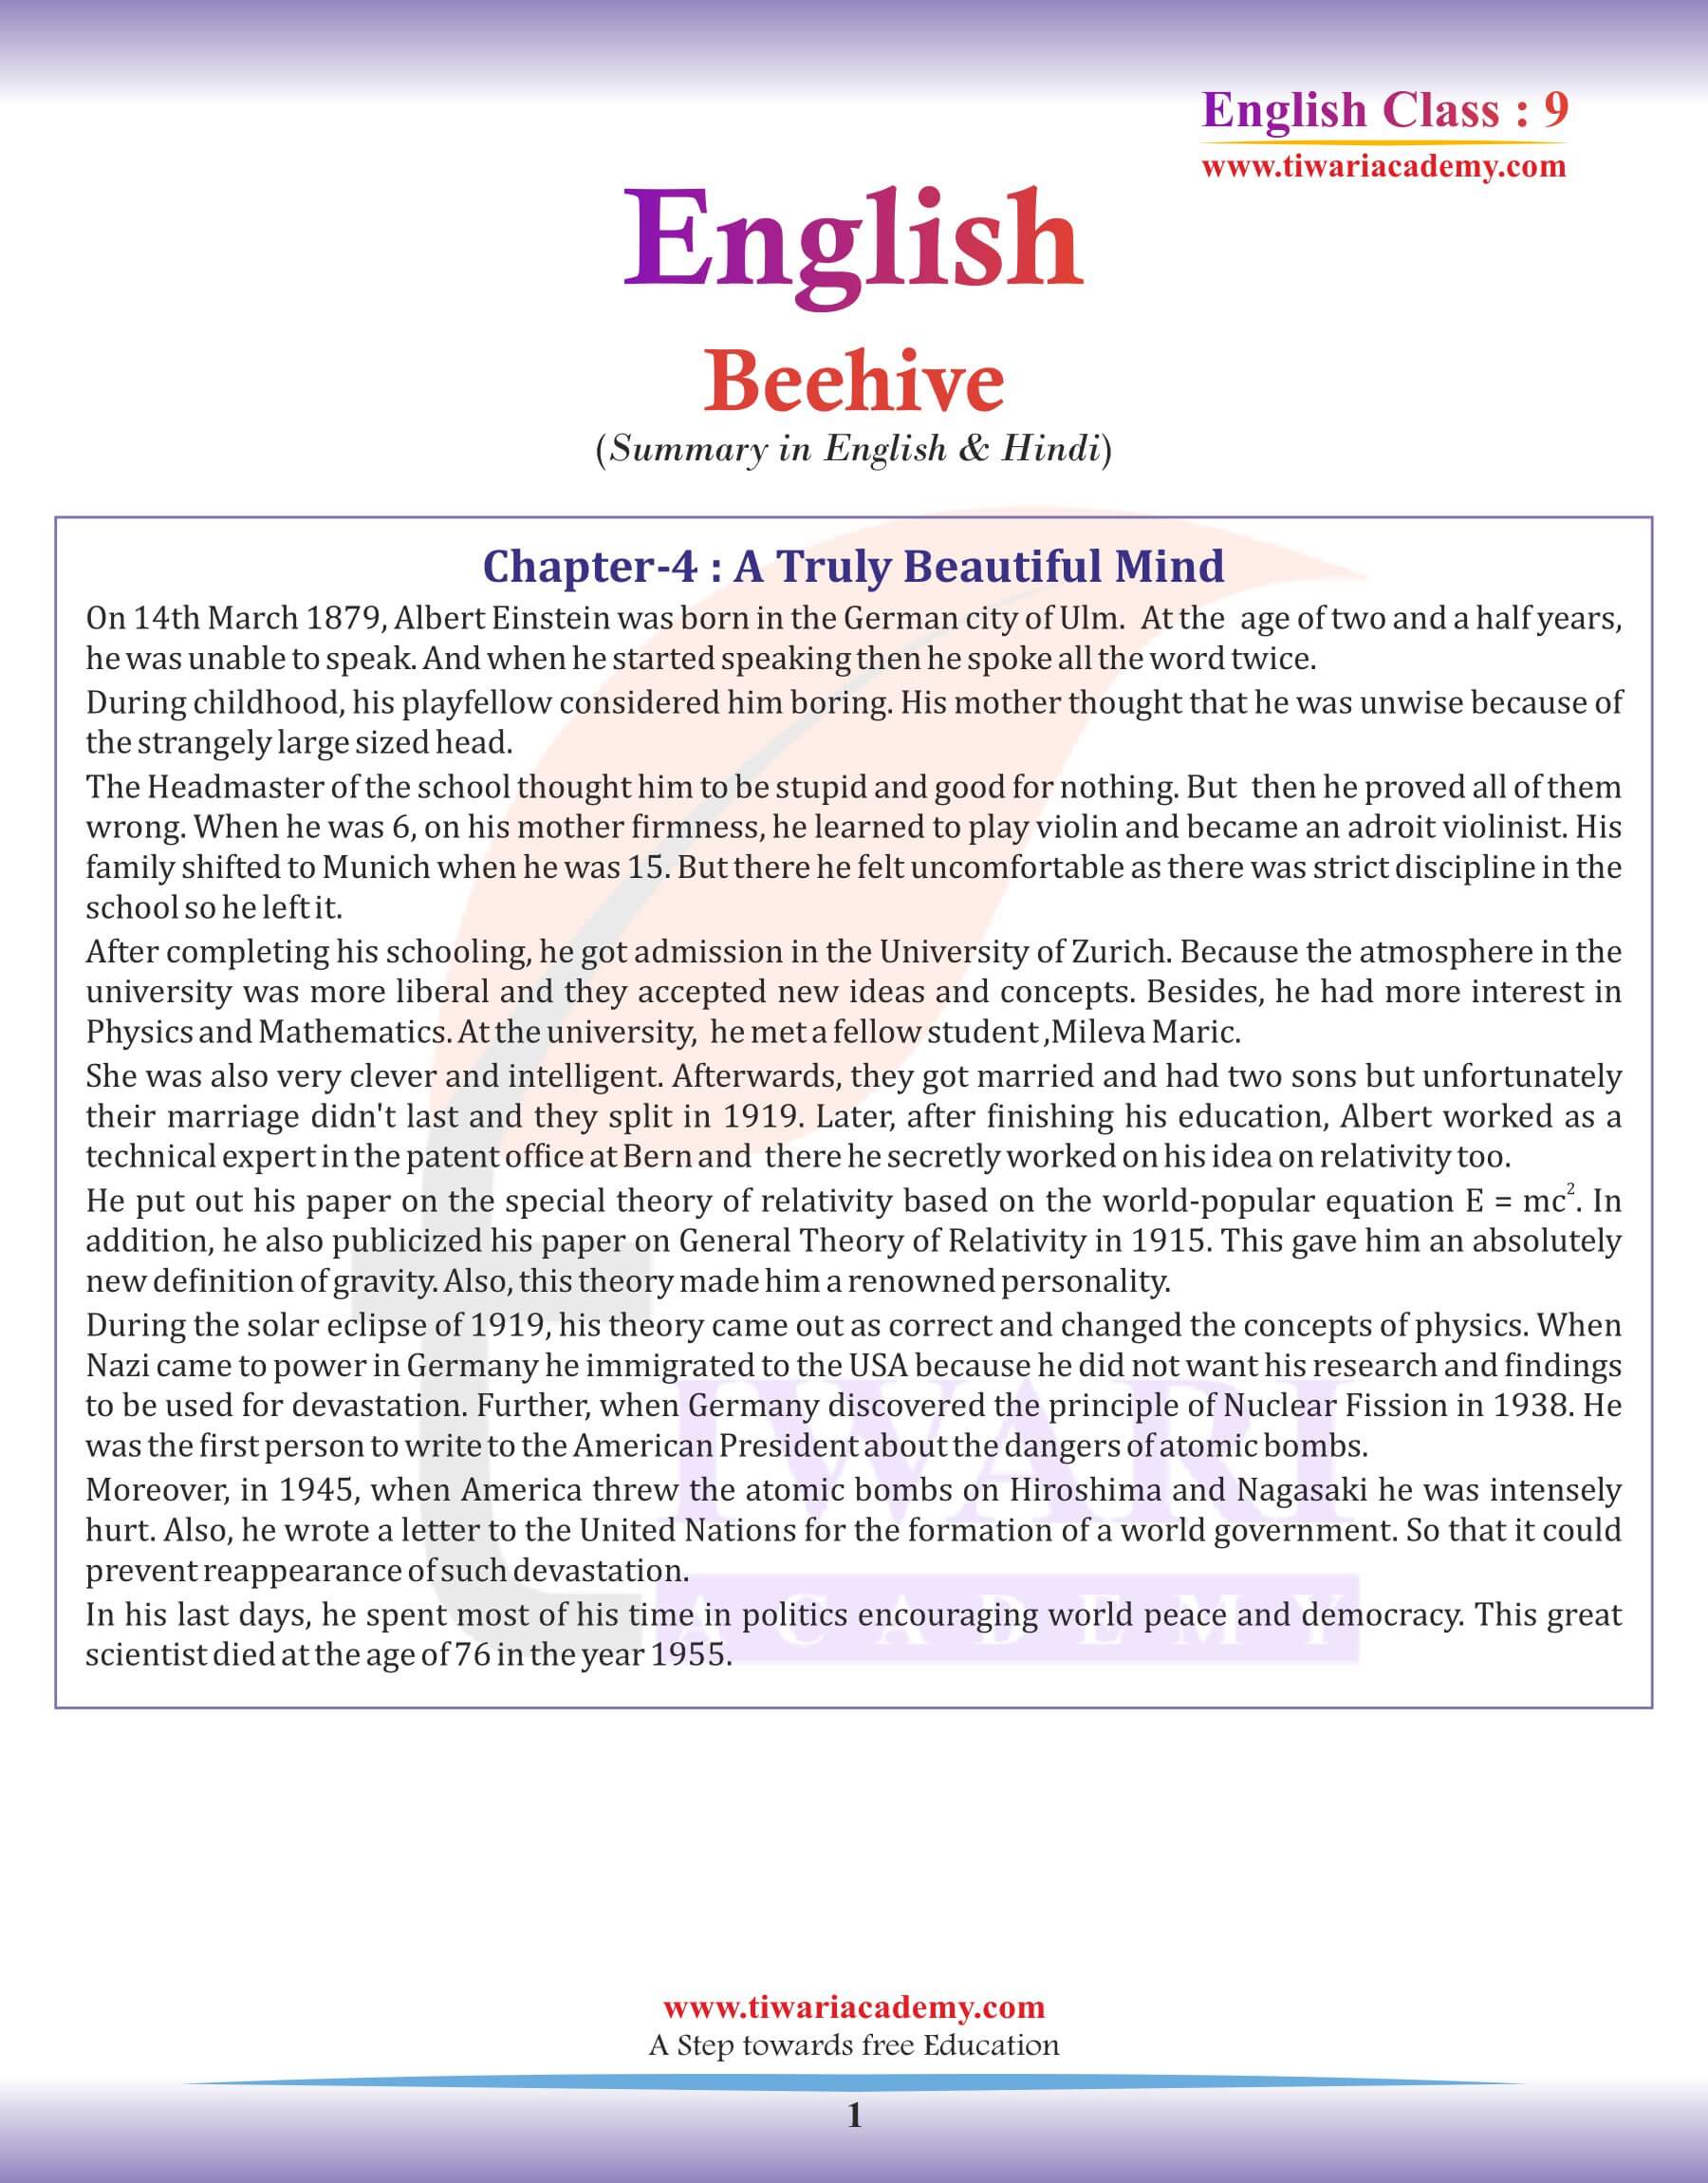 Class 9 English Beehive Chapter 4 Summary in English